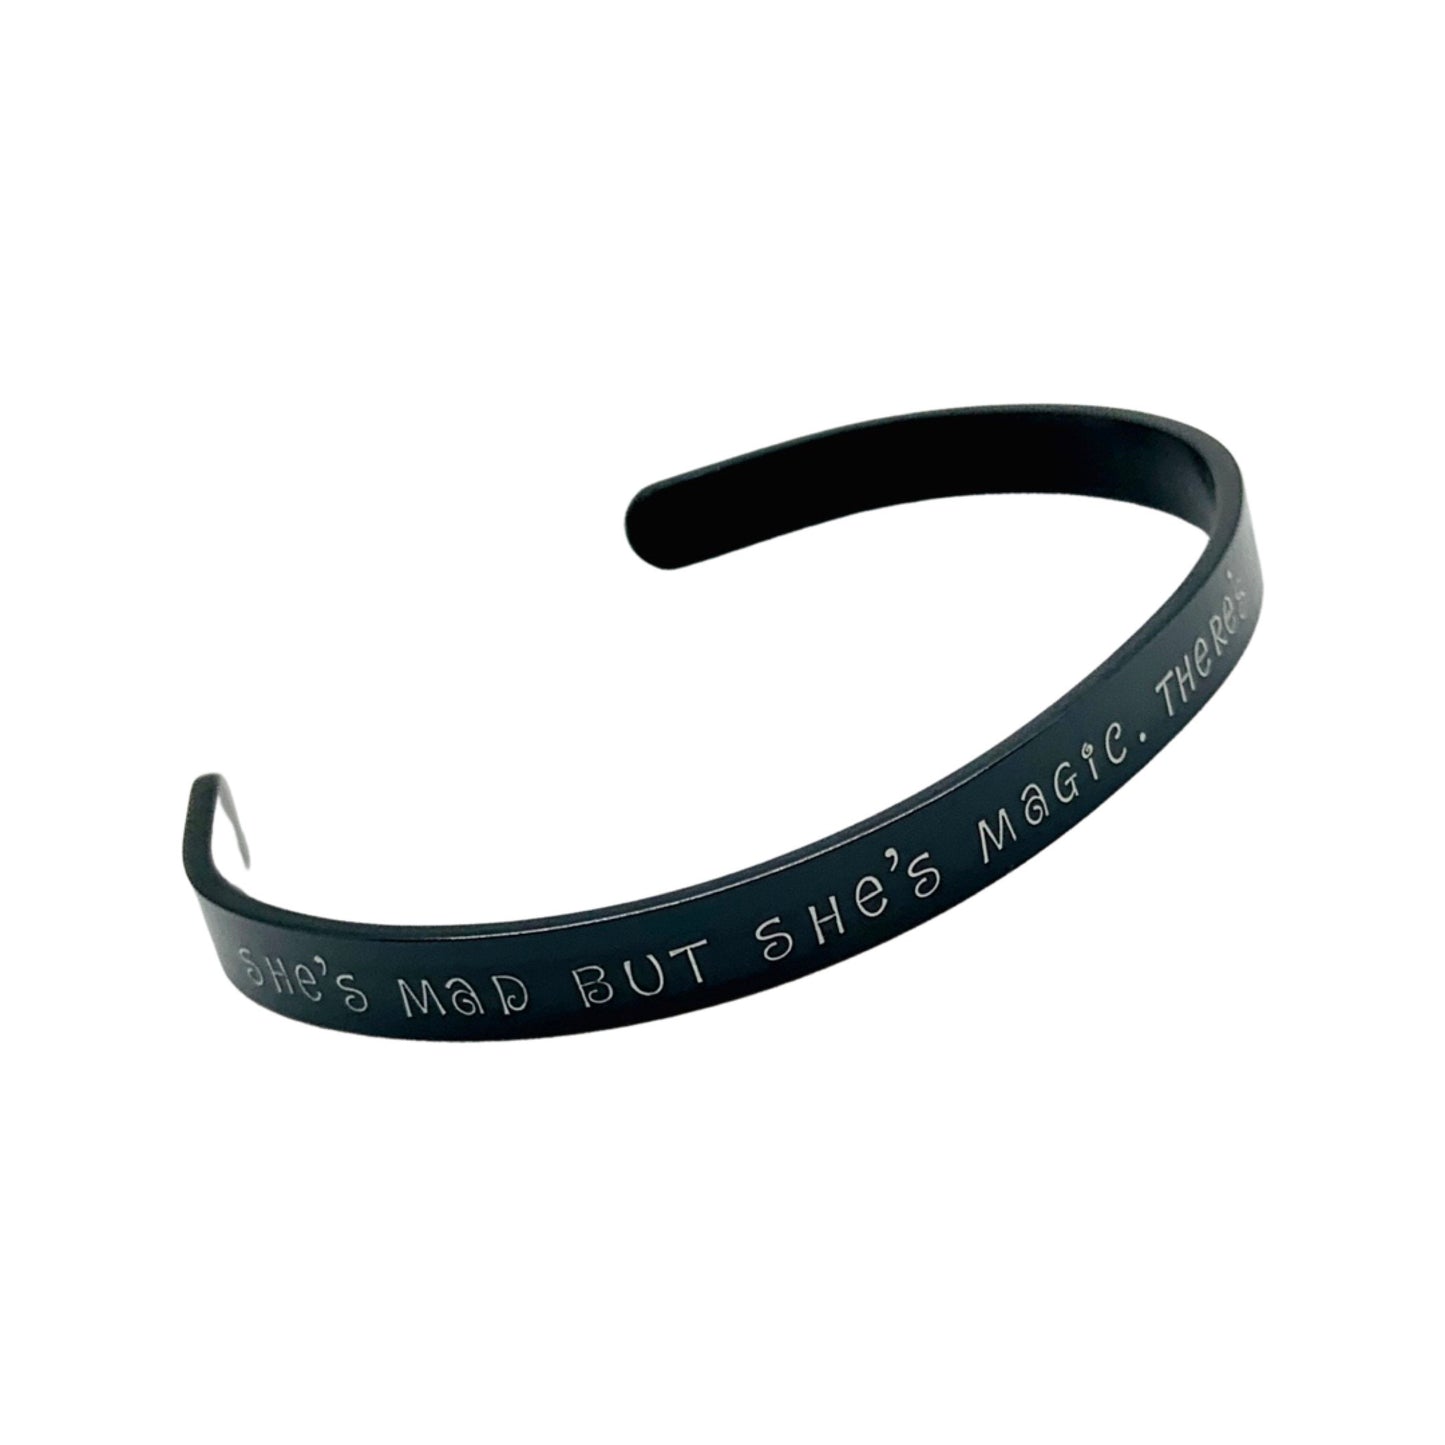 She's mad but she's magic. There's no lie in her fire. - Cuff Bracelet